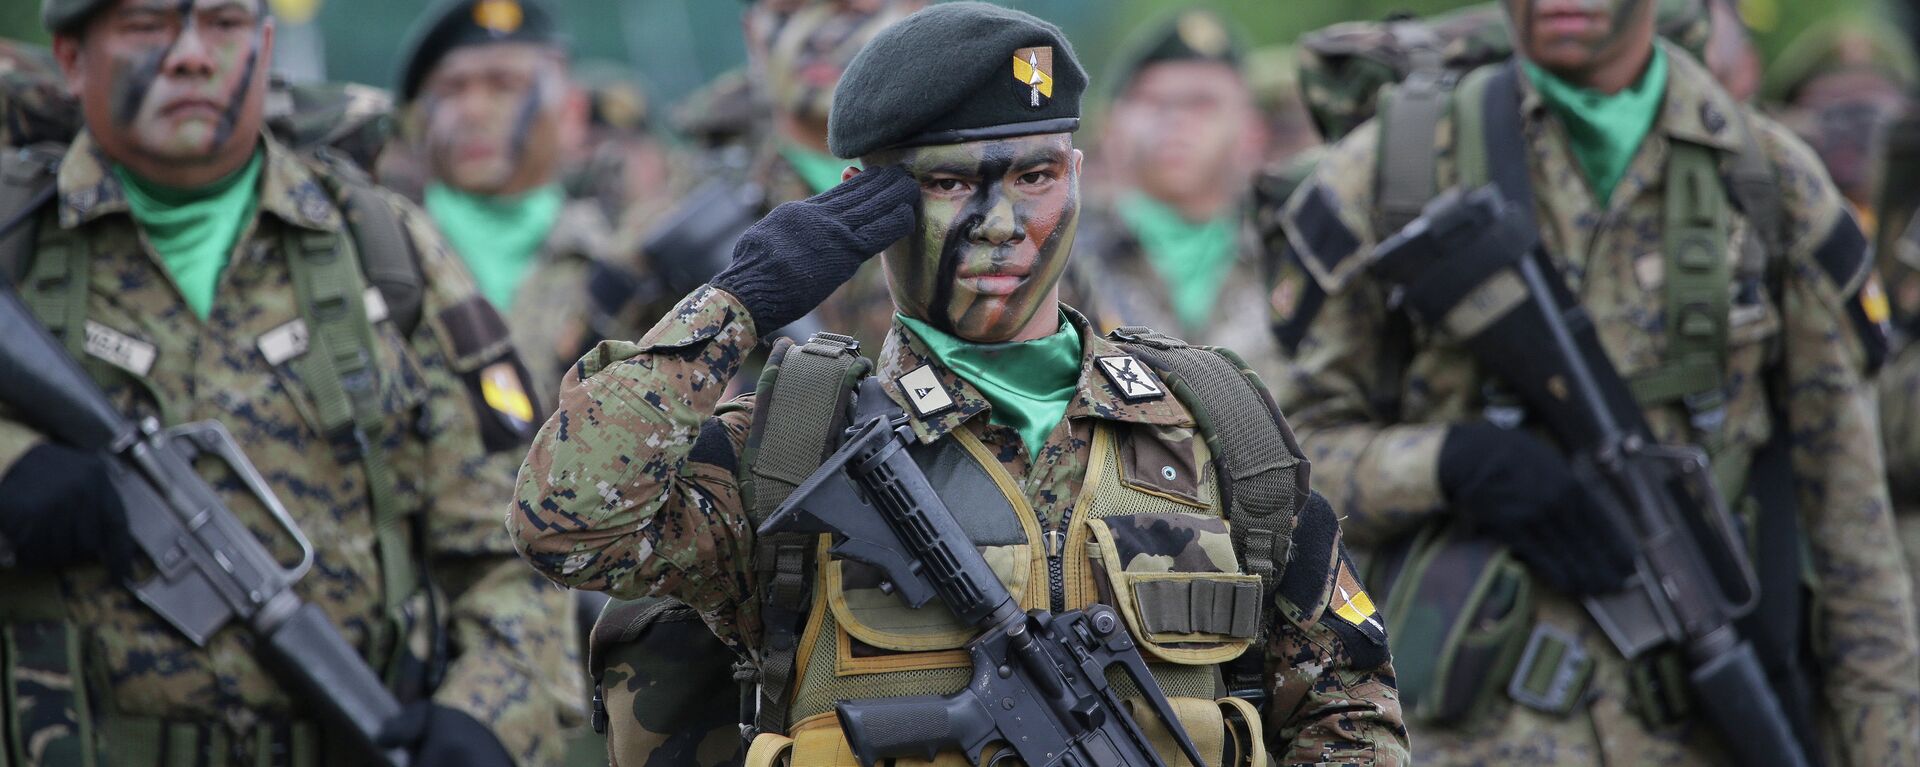 Philippine troopers participate in ceremonies on the 79th anniversary of the Armed Forces of the Philippines (AFP) at Camp Aguinaldo military headquarters in suburban Quezon city, north of Manila, Philippines on Thursday, Dec. 18, 2014 - Sputnik Mundo, 1920, 27.05.2022